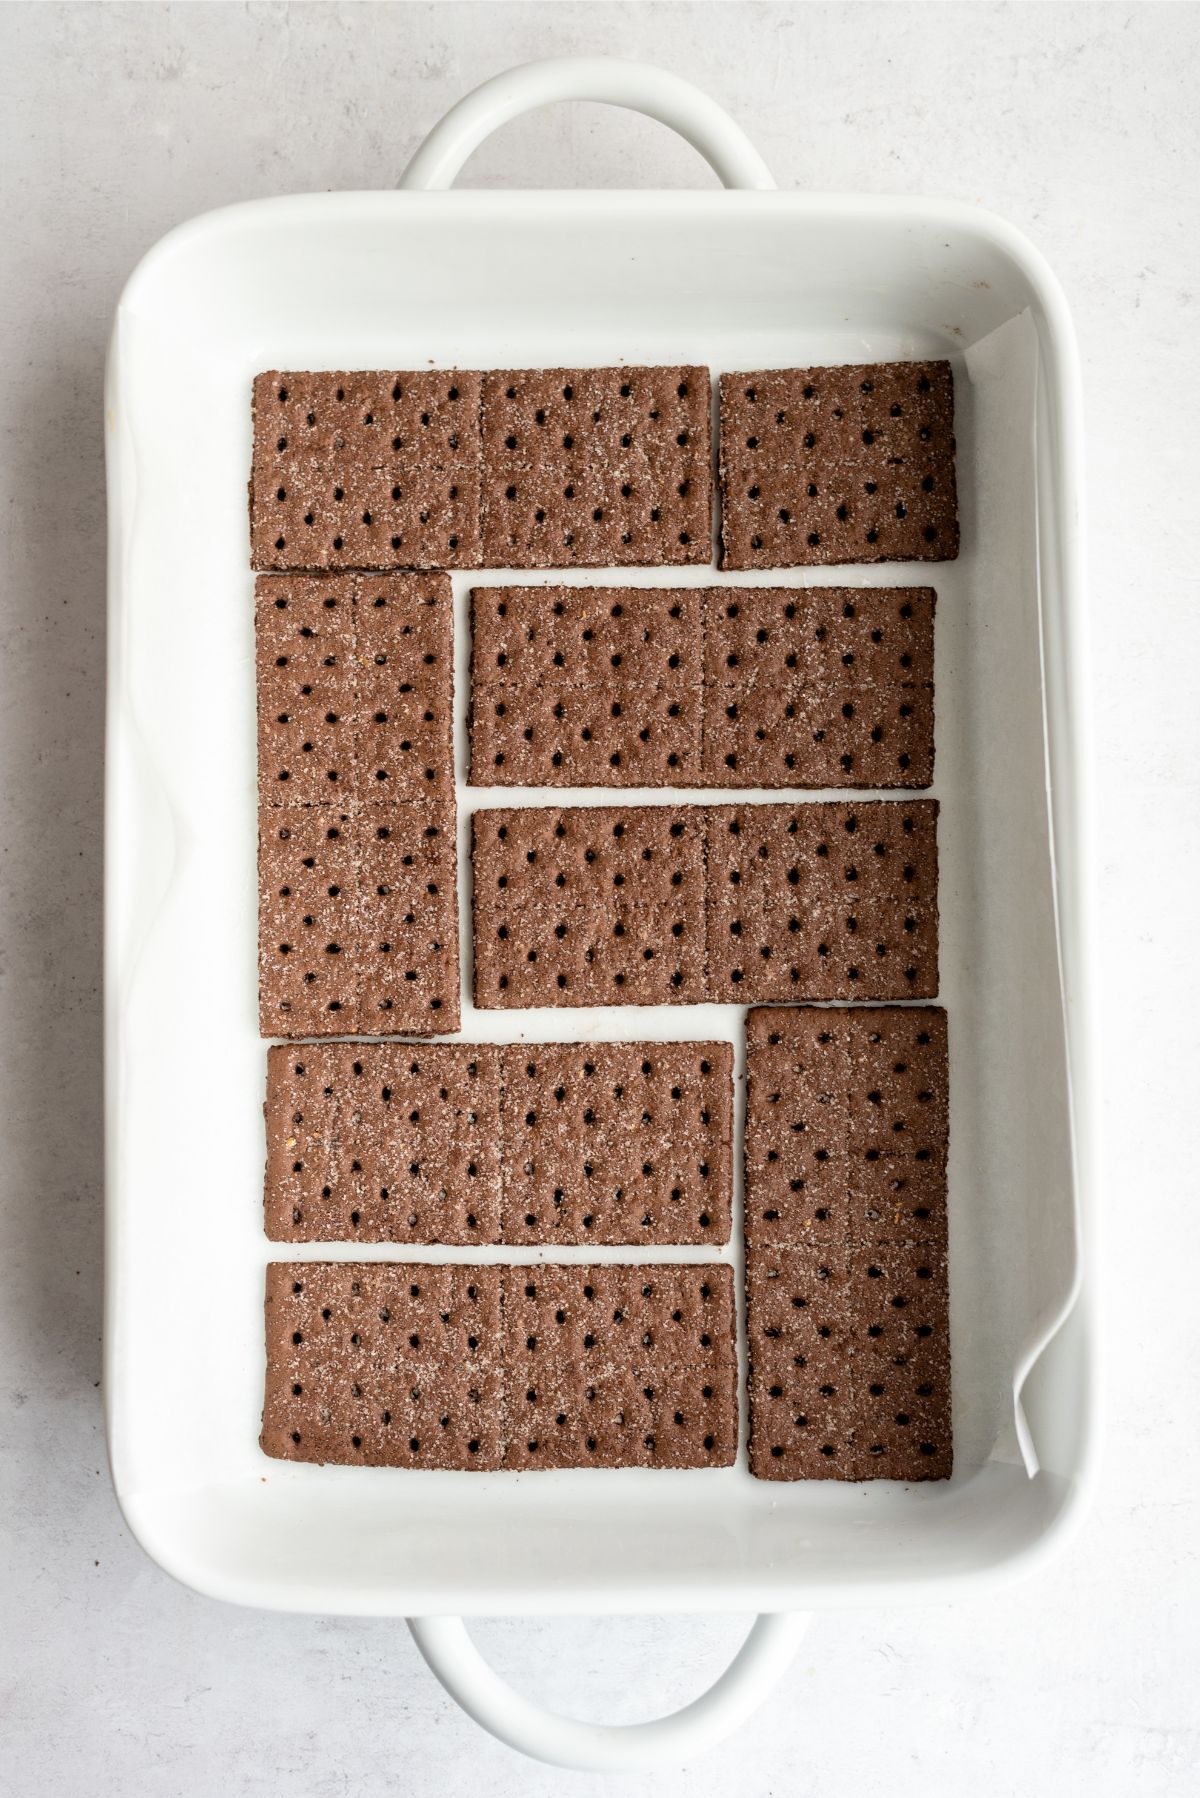 Chocolate graham crackers on the bottom of a 9x13 pan